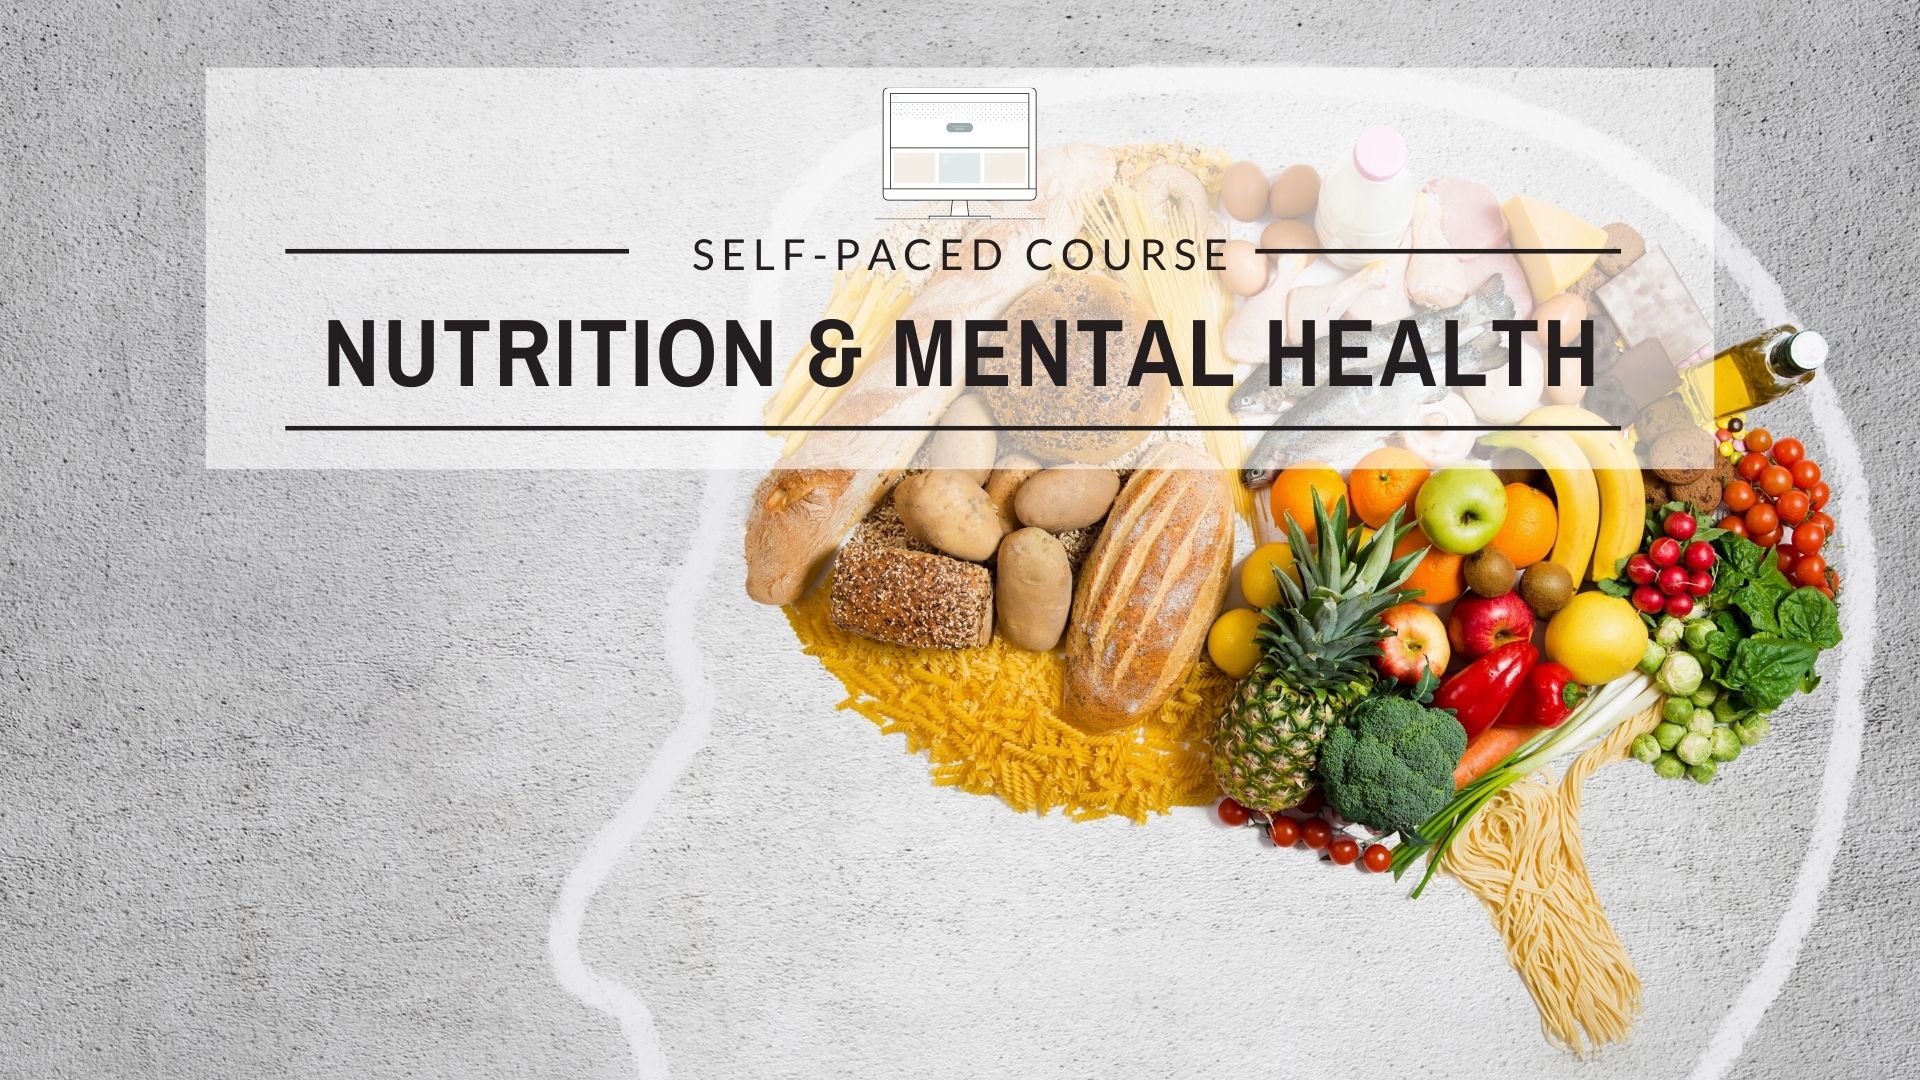 “Nourish Your Mind: The Powerful Link Between Nutrition and Mental Health”